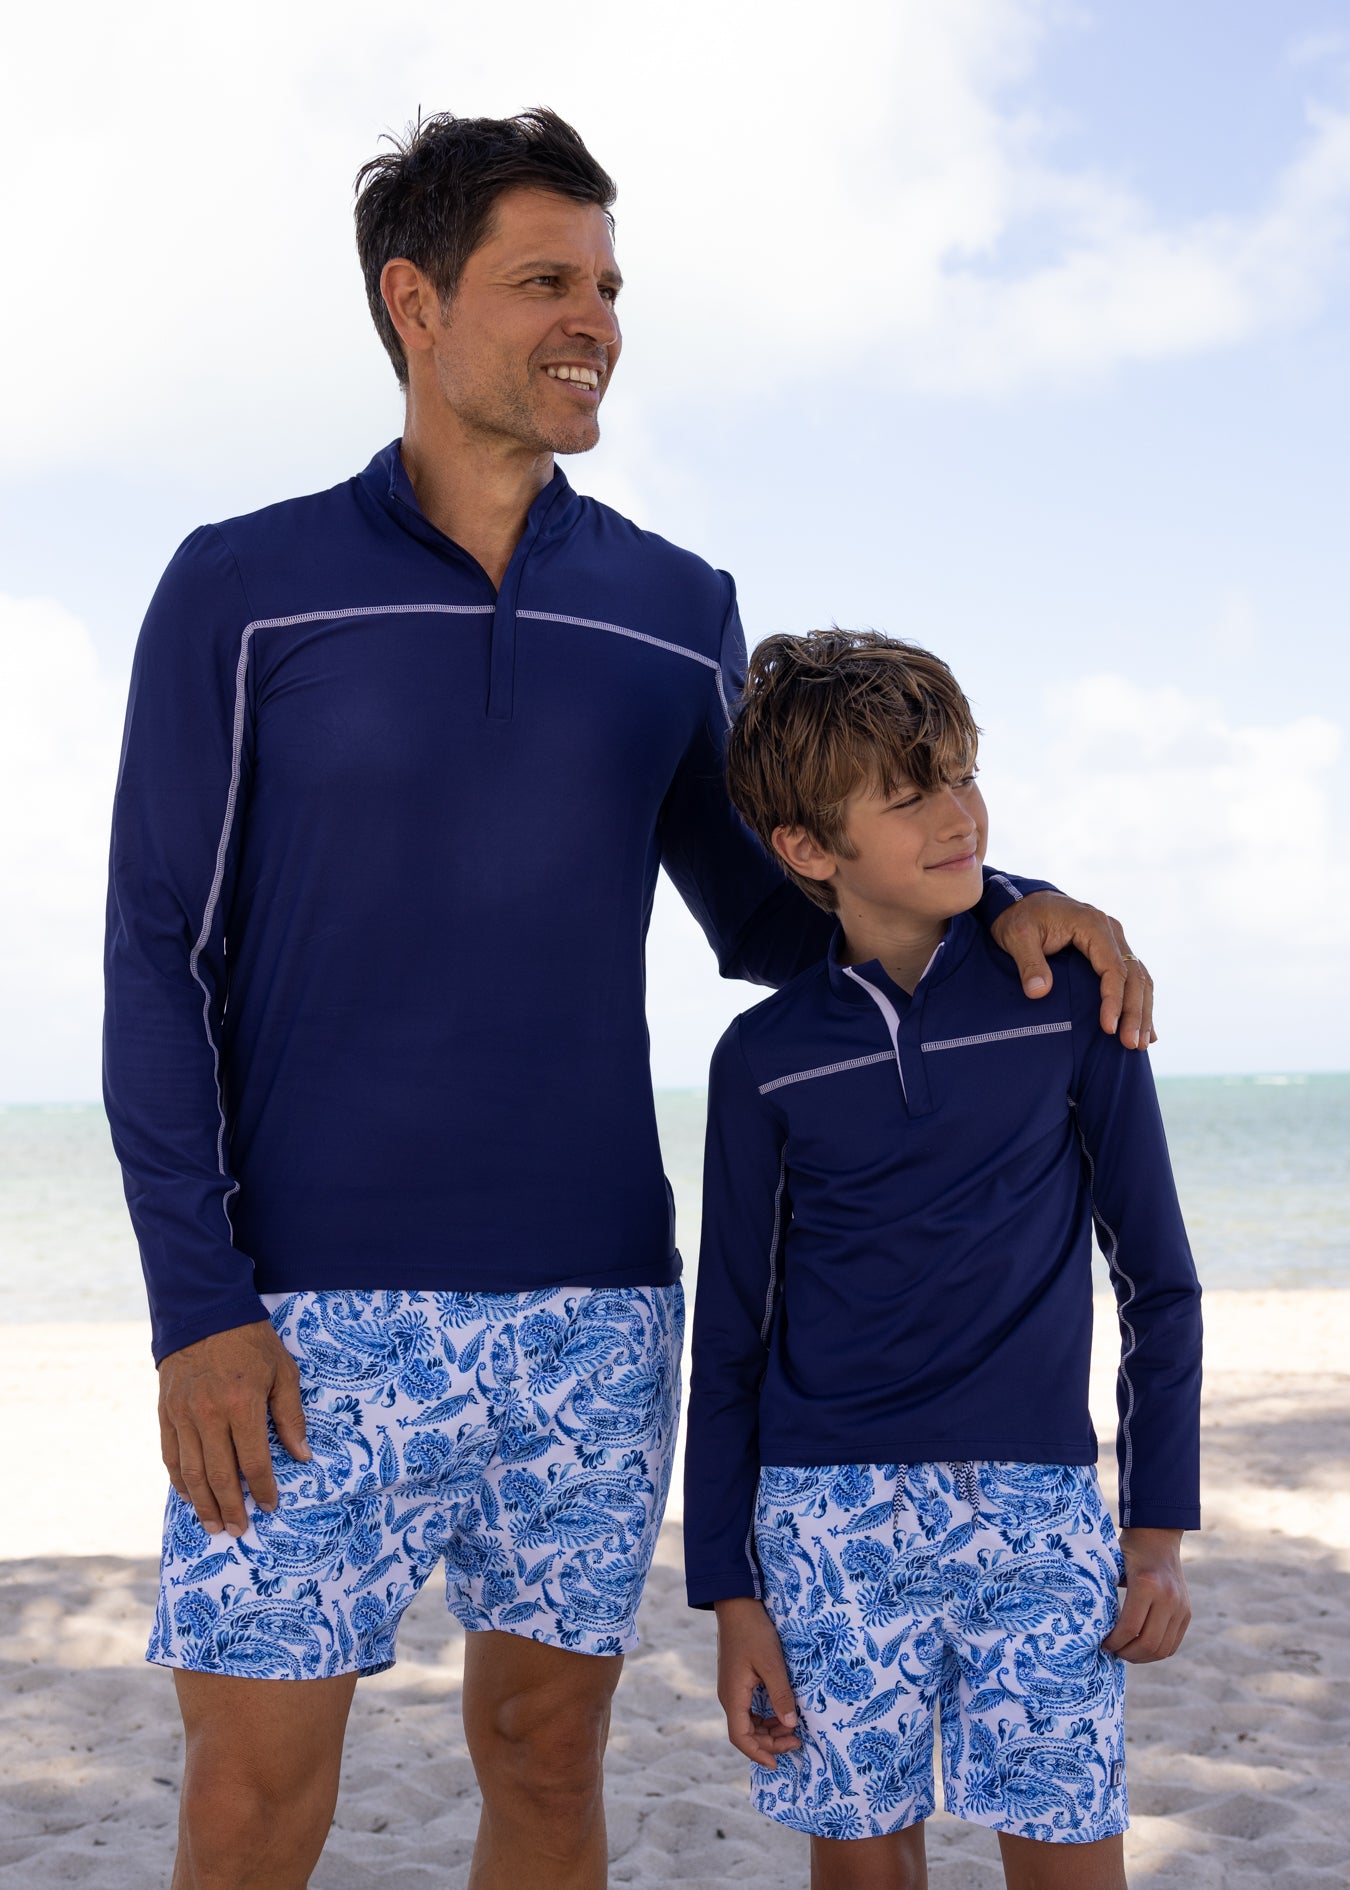 Father and son on beach wearing Men's Charleston Paisley Swim Trunks with Men's Navy Sport Zip Top and Boys Navy Sport Zip Top with Boys Charleston Paisley Swim Trunks